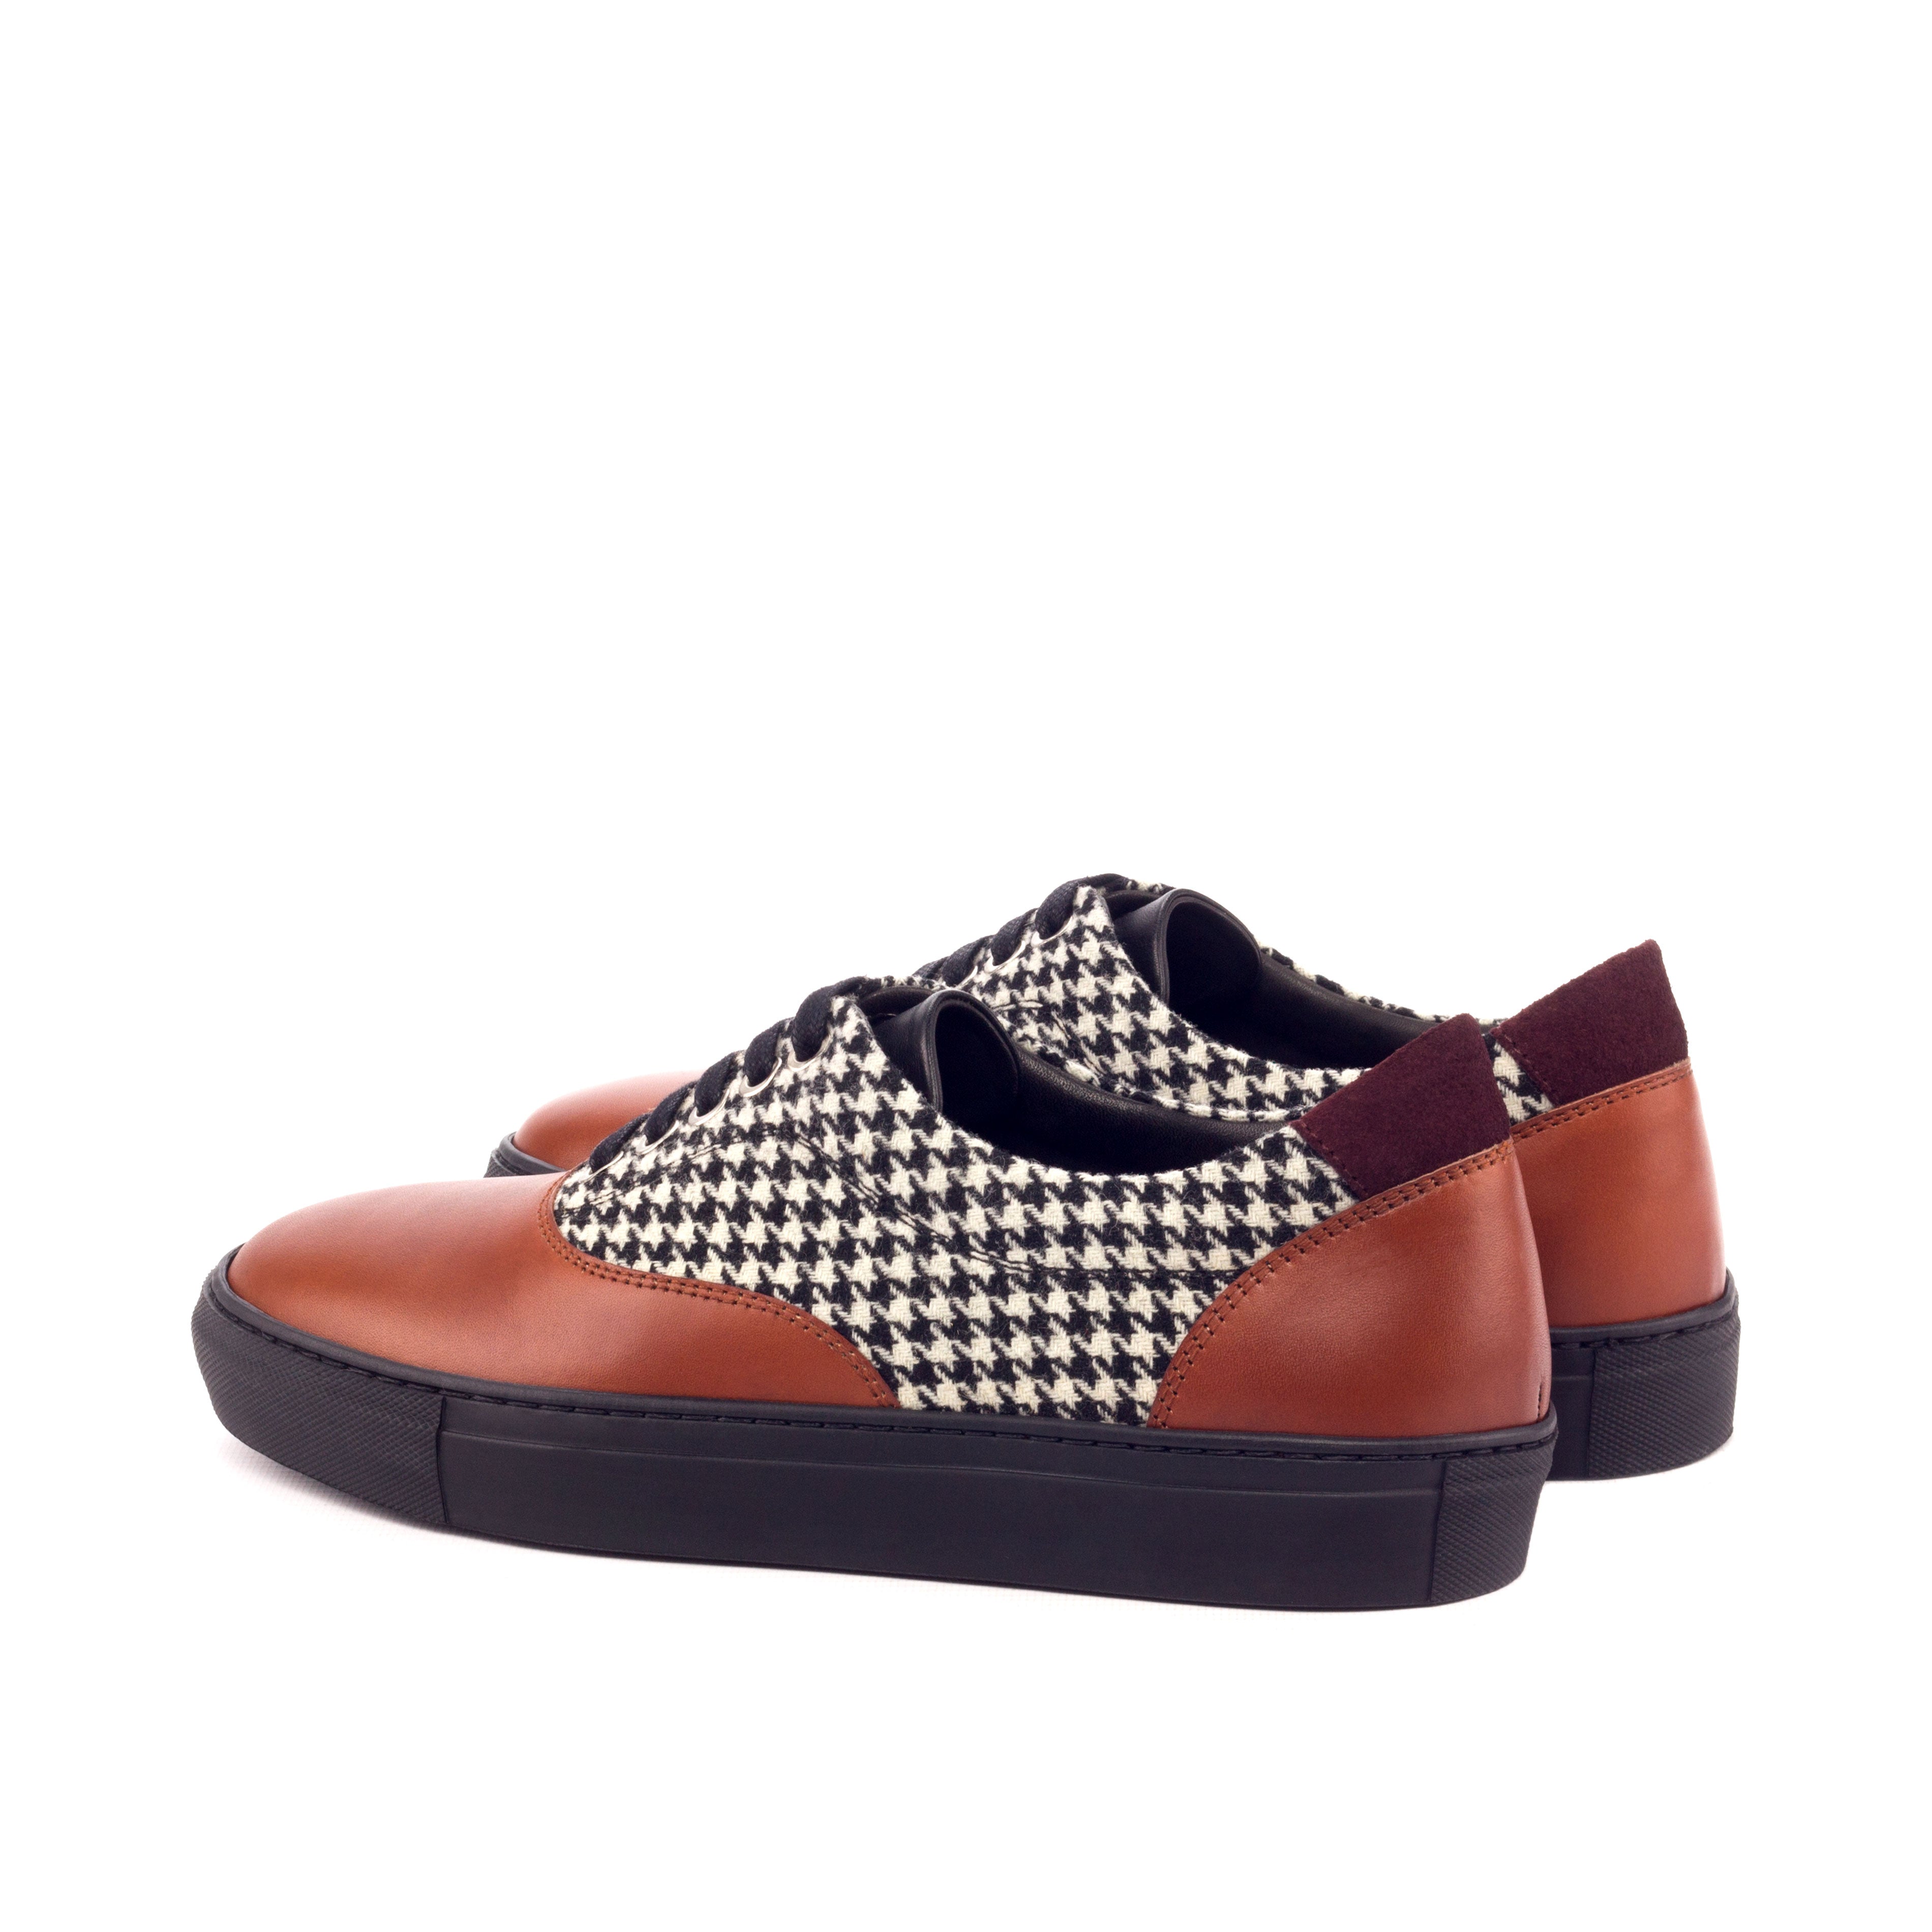 Houndstooth and Cognac Calf Top Sider